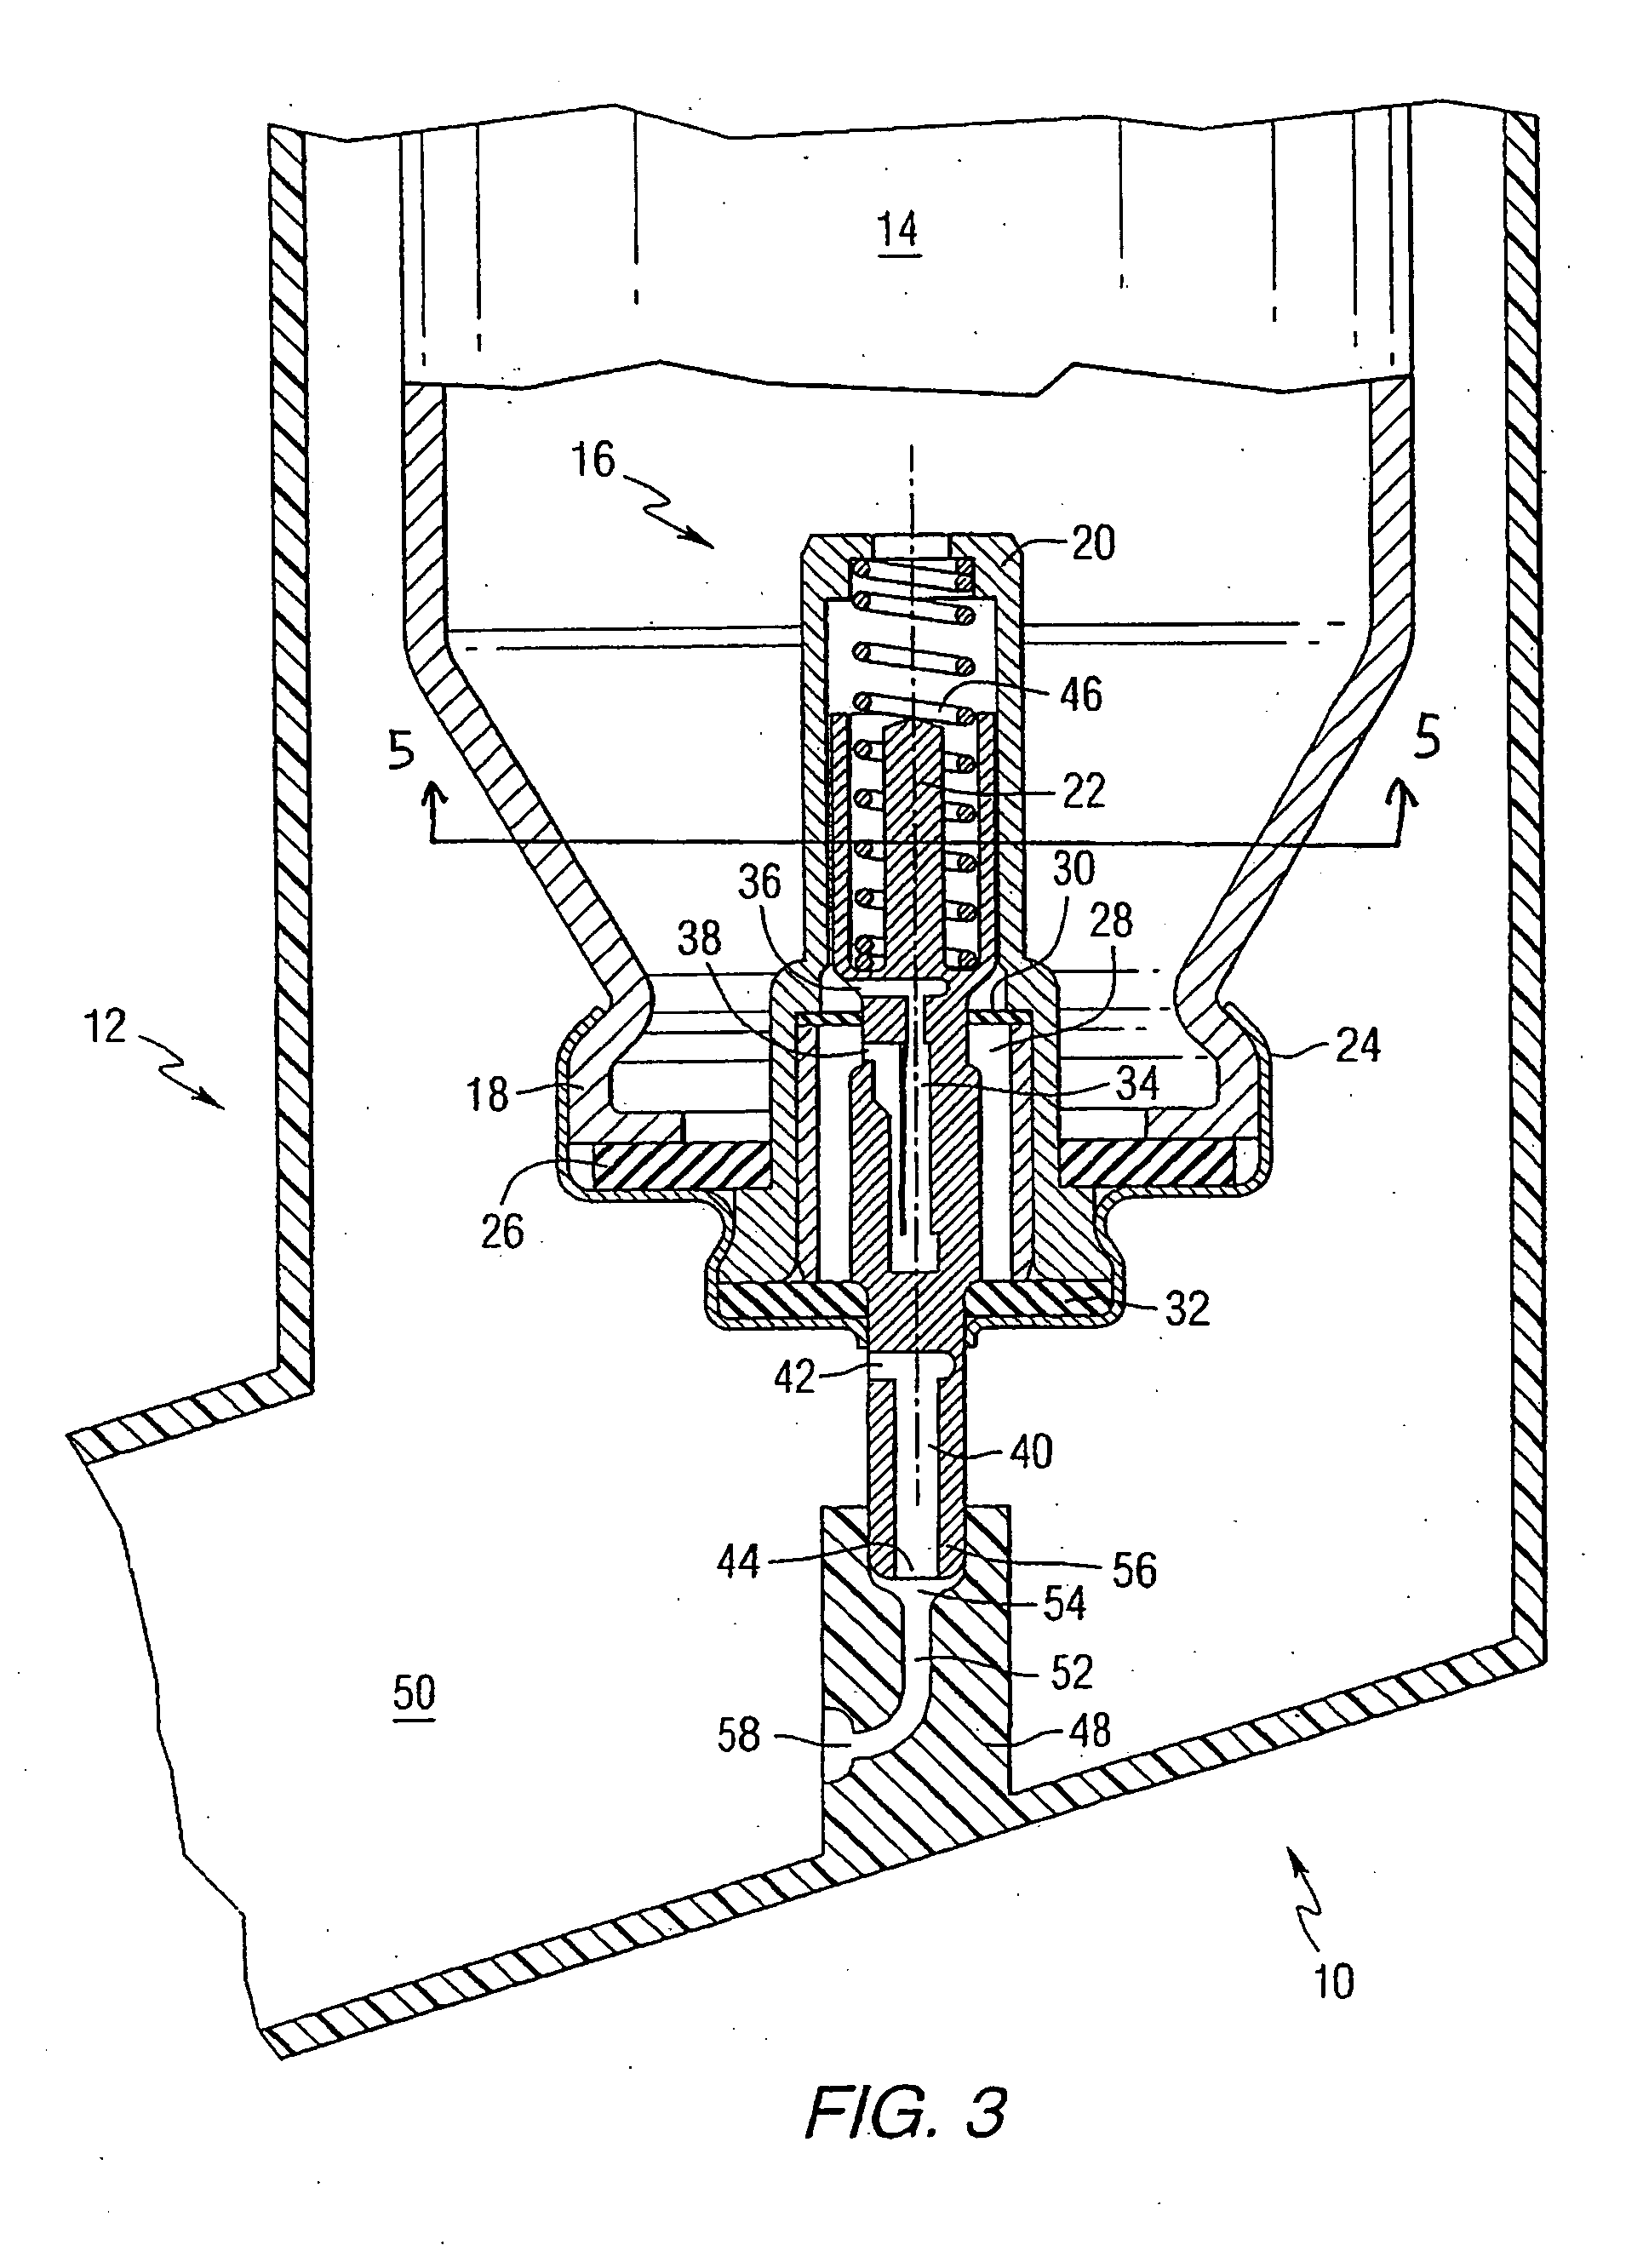 Cleaning compound for and method of cleaning valves and actuators of metered dose dispensers containing pharmaceutical compositions